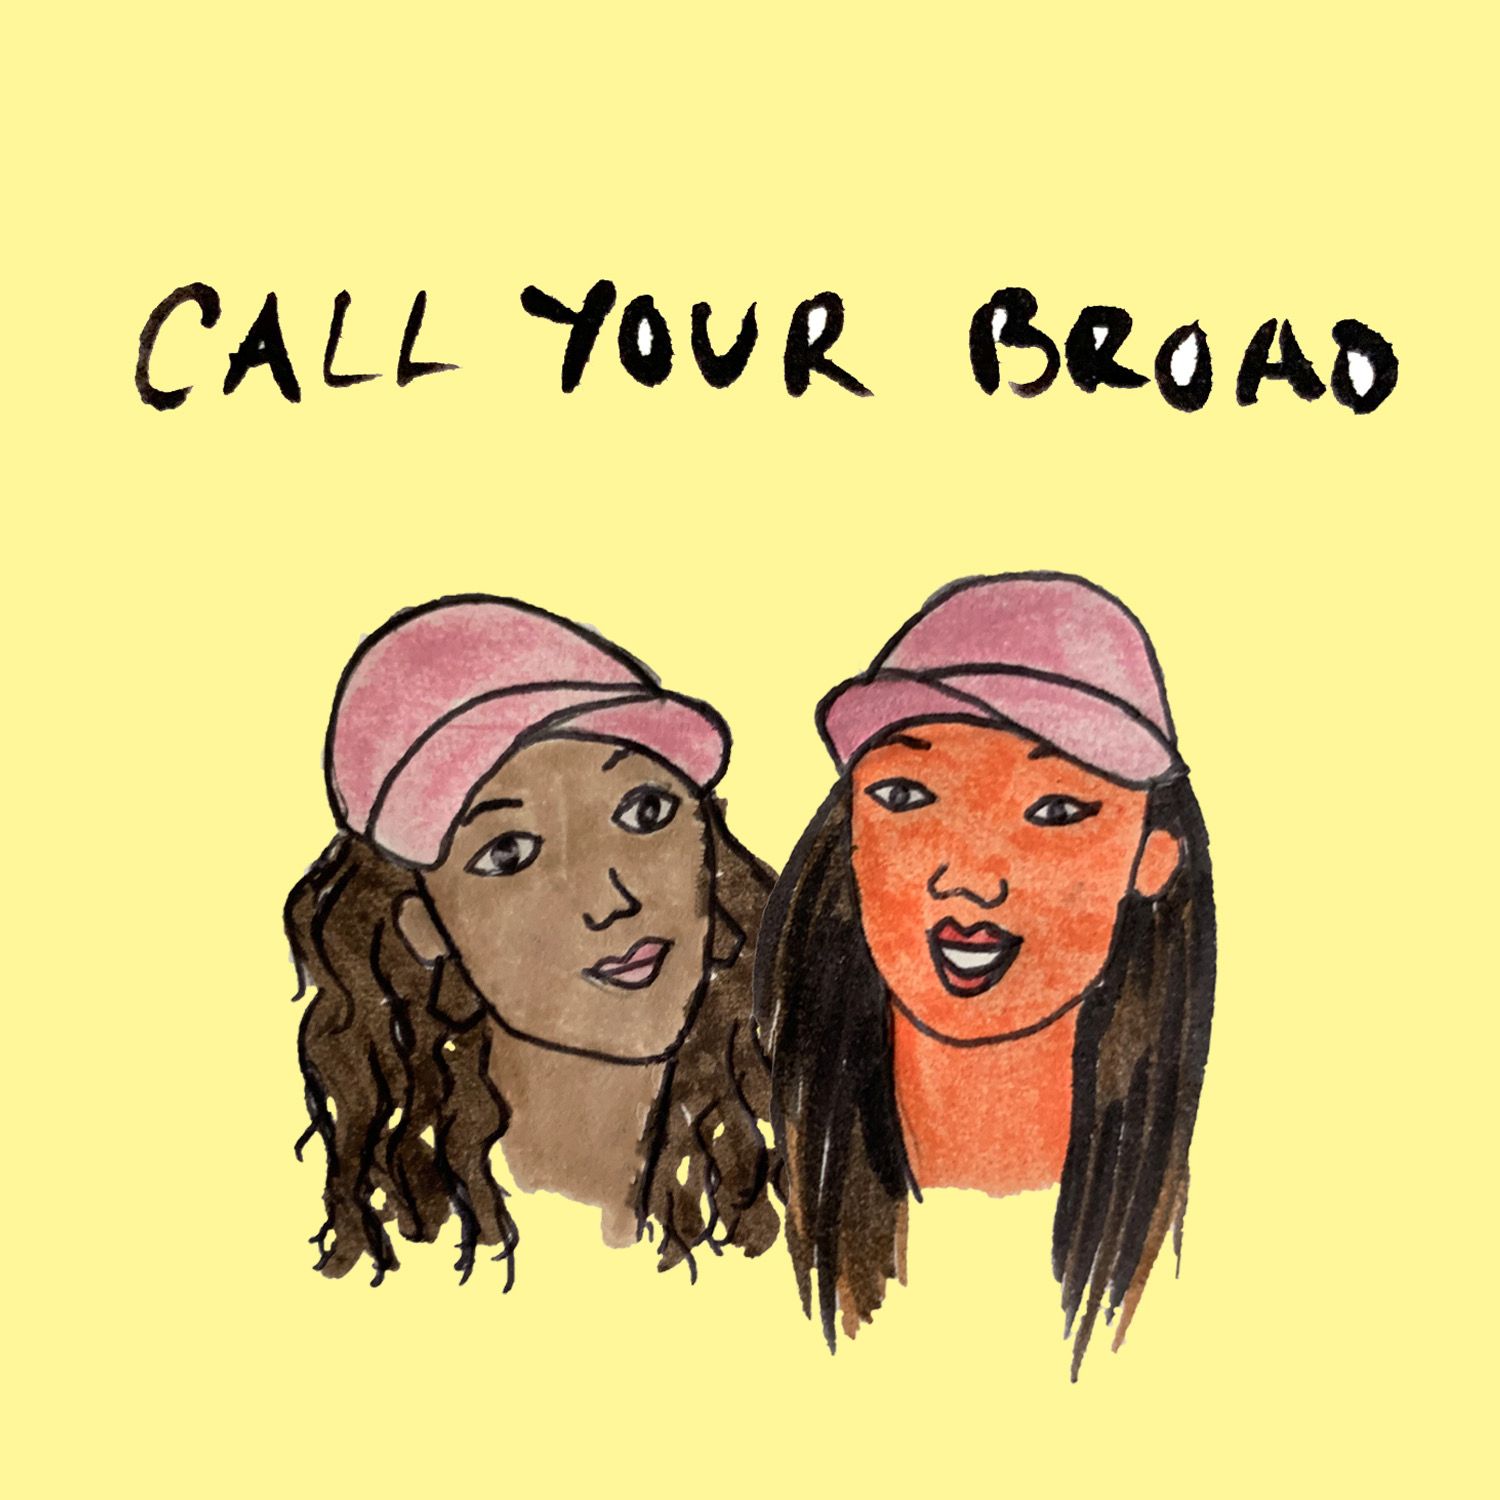 CALL YOUR BROAD